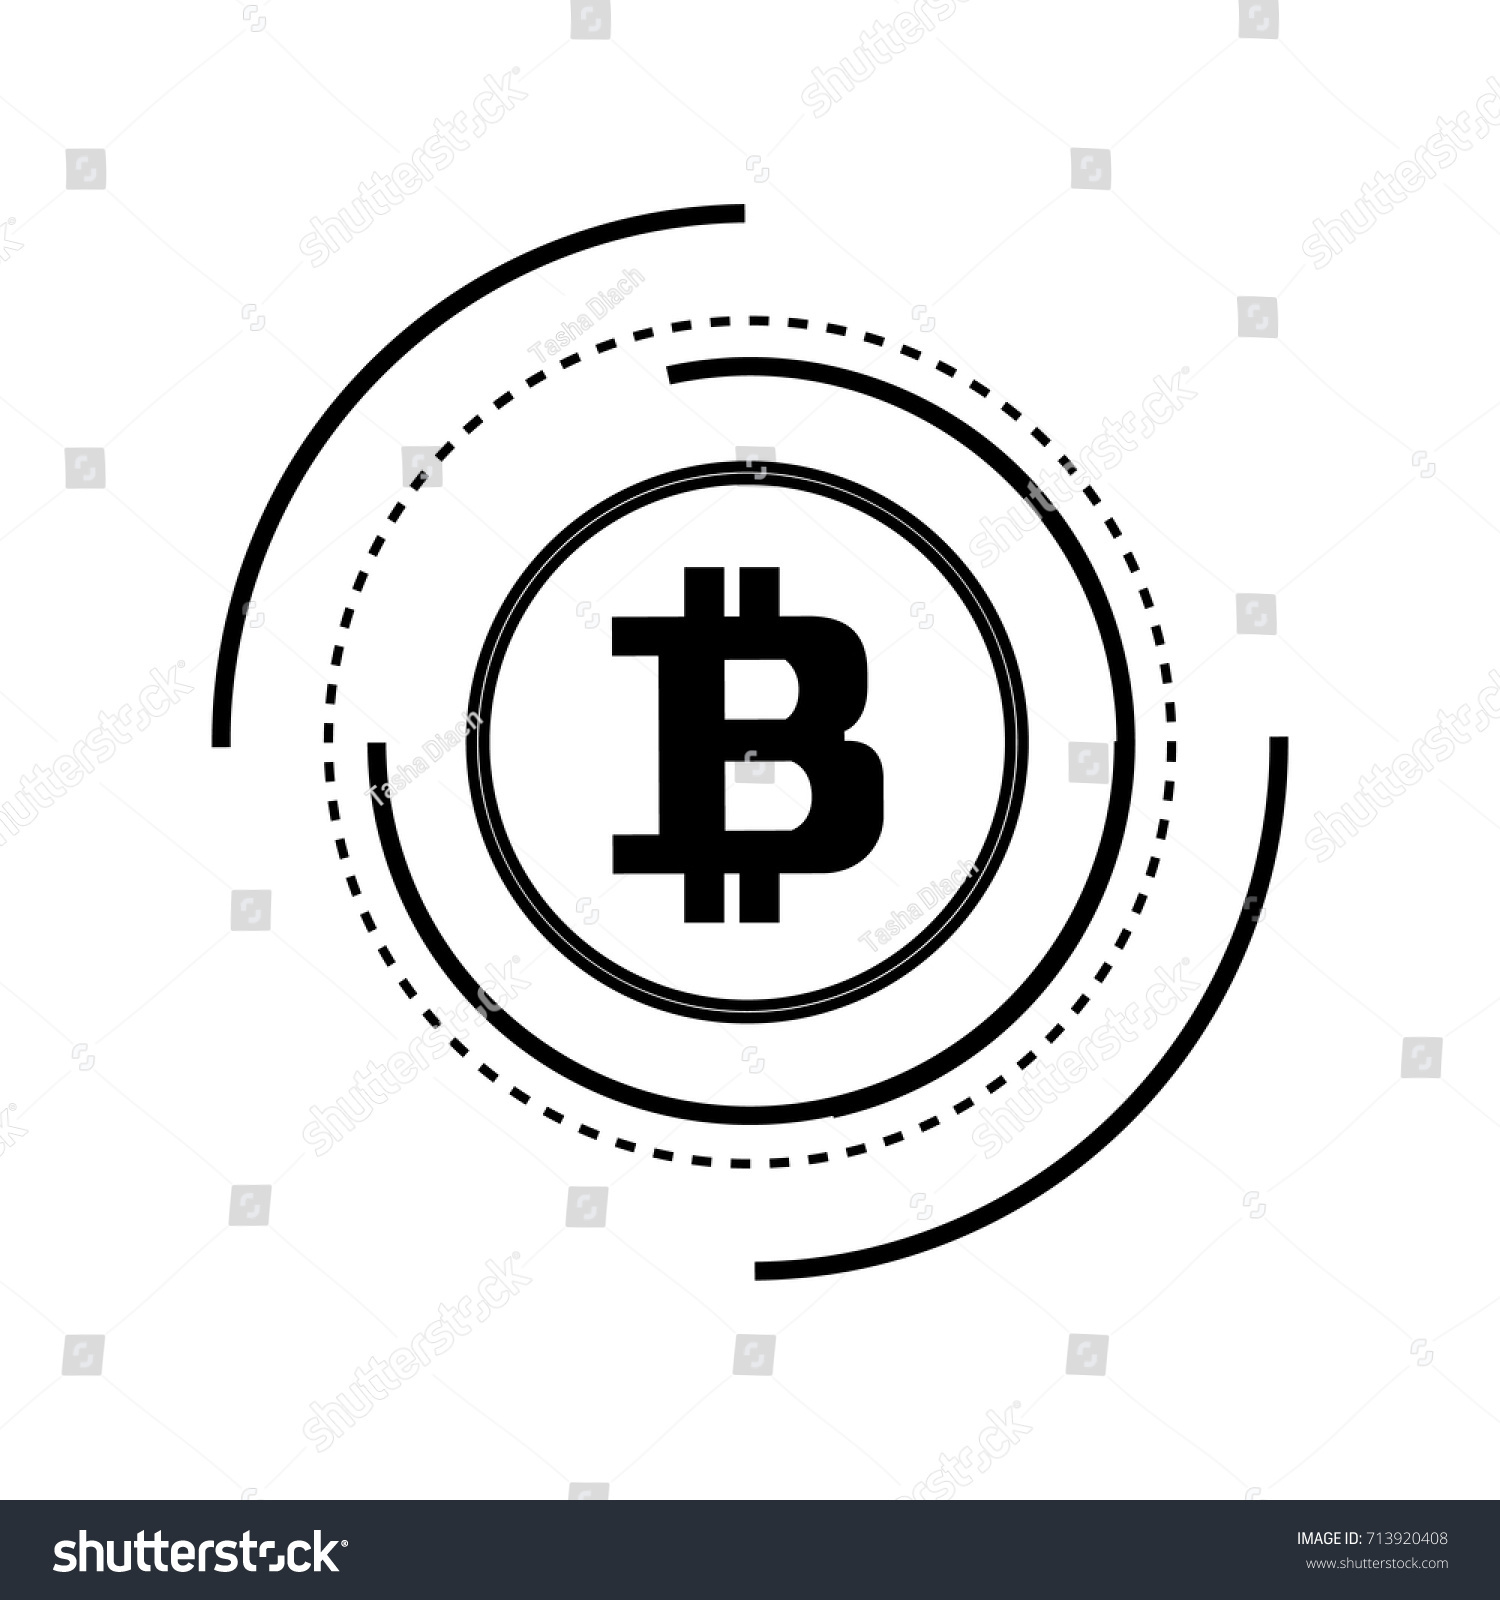 SVG of Bitcoins. Abstract technology bitcoins logo on binary code and gear black background. svg